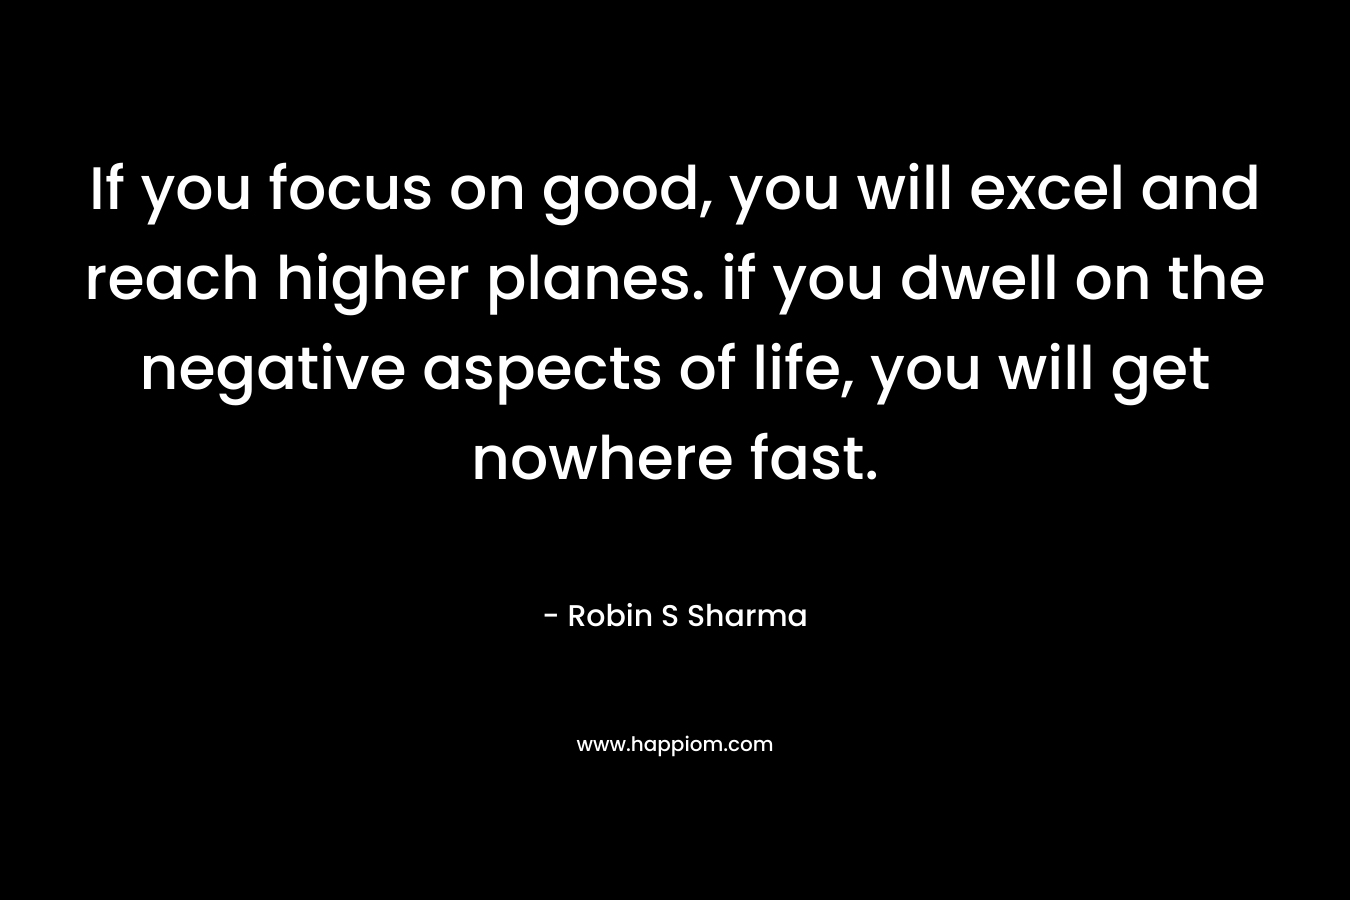 If you focus on good, you will excel and reach higher planes. if you dwell on the negative aspects of life, you will get nowhere fast. – Robin S Sharma